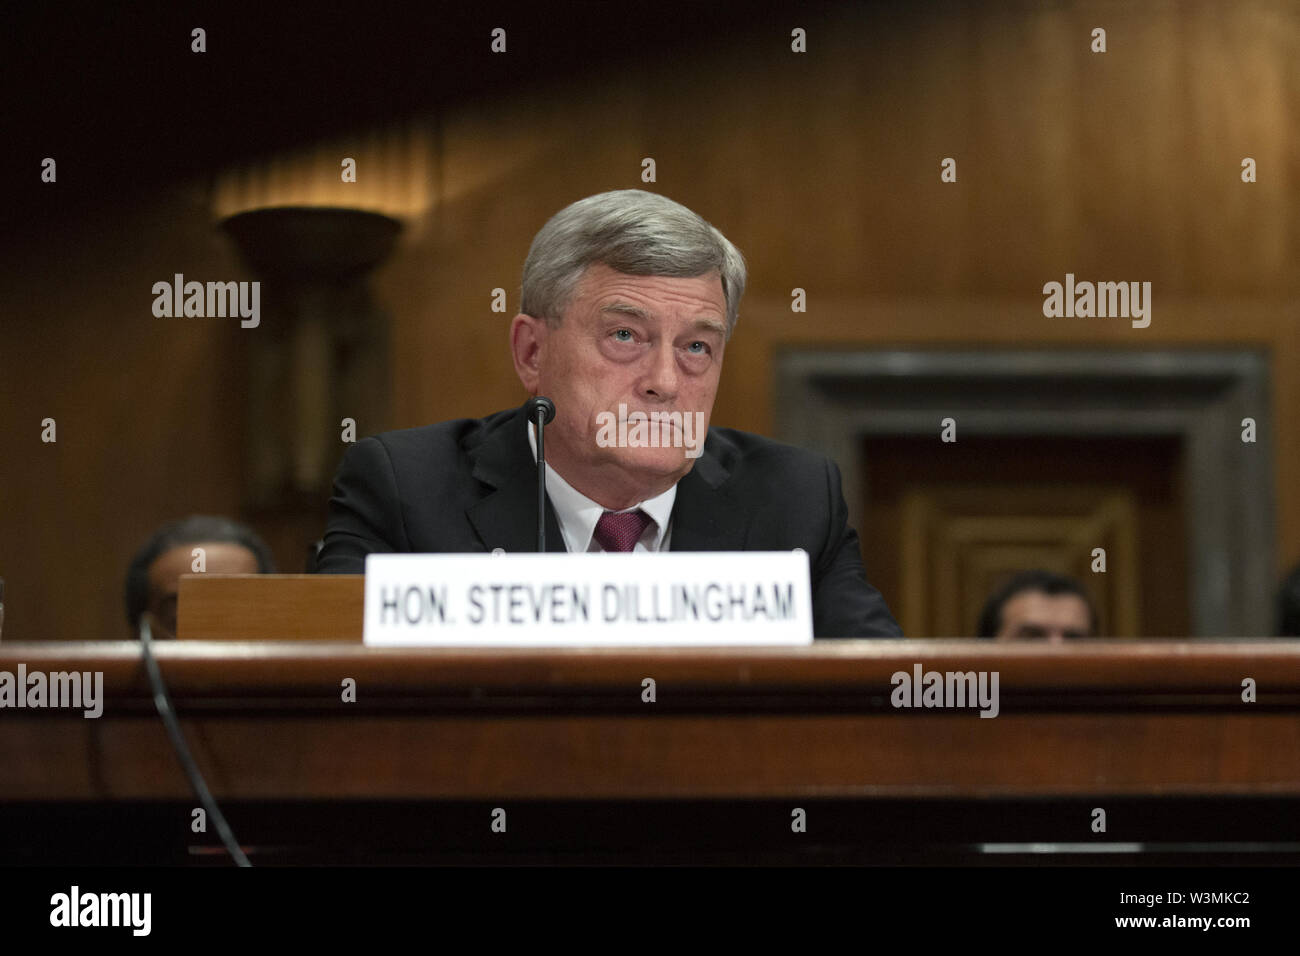 Washington, District of Columbia, USA. 16th July, 2019. Steven Dillingham, Director of the U.S. Census Bureau, testifies before the U.S. Senate Committee on Homeland Security and Governmental Affairs on Capitol Hill in Washington, DC, U.S. on July 16, 2019, discussing the security and accuracy of the 2020 census. Credit: Stefani Reynolds/CNP/ZUMA Wire/Alamy Live News Stock Photo